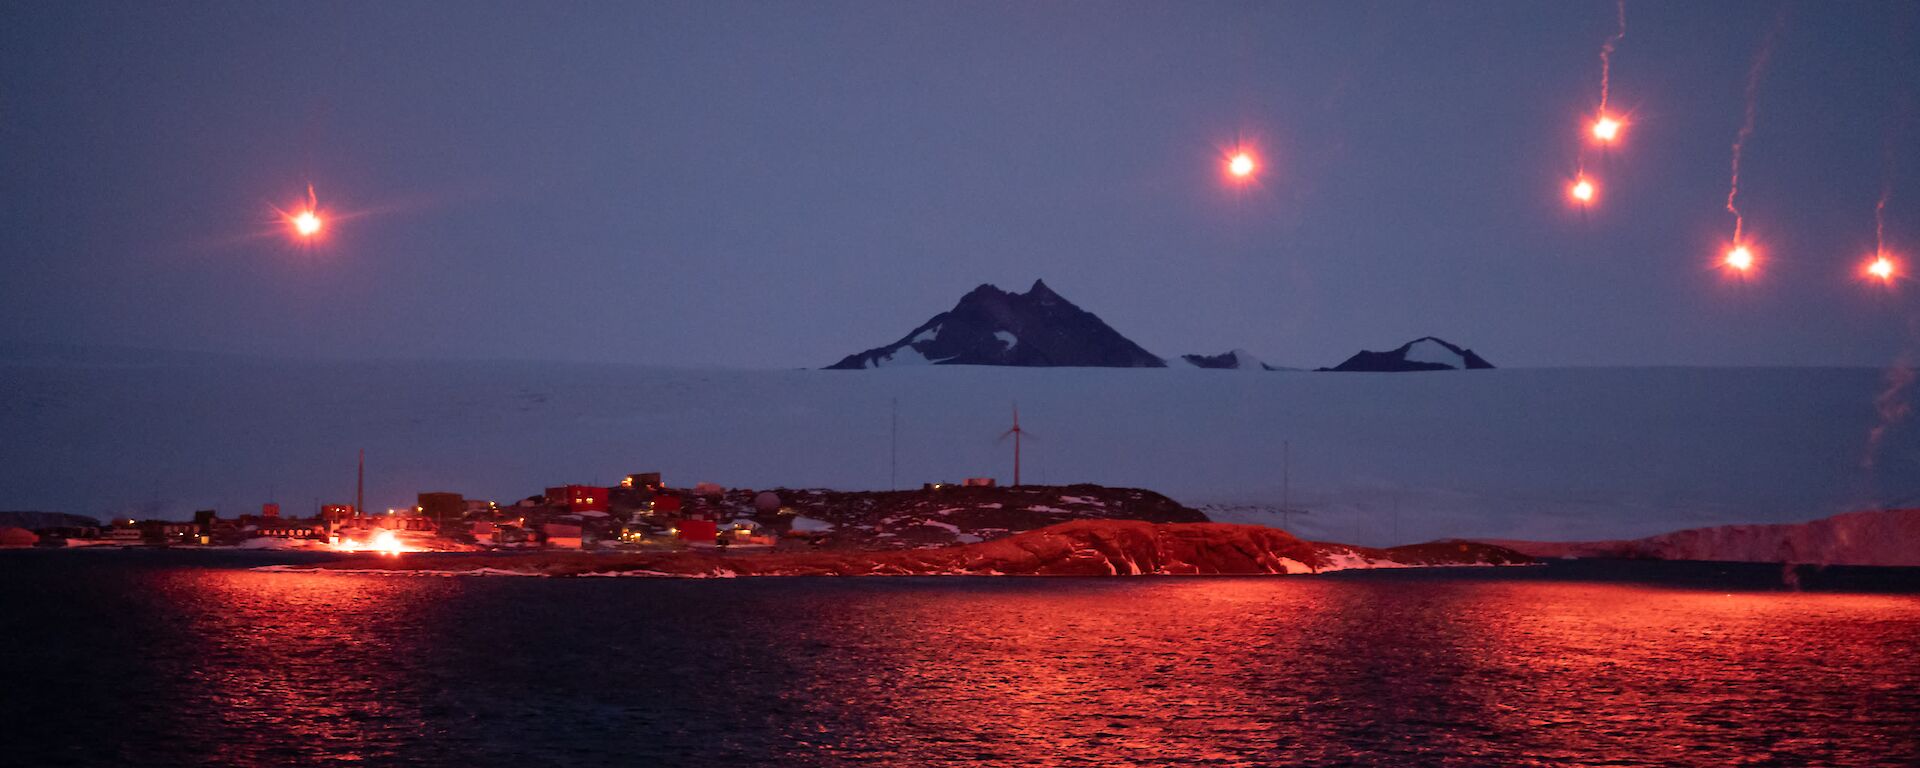 Seven bright pink flares light up the sky and station at Mawson - as viewed from the ship